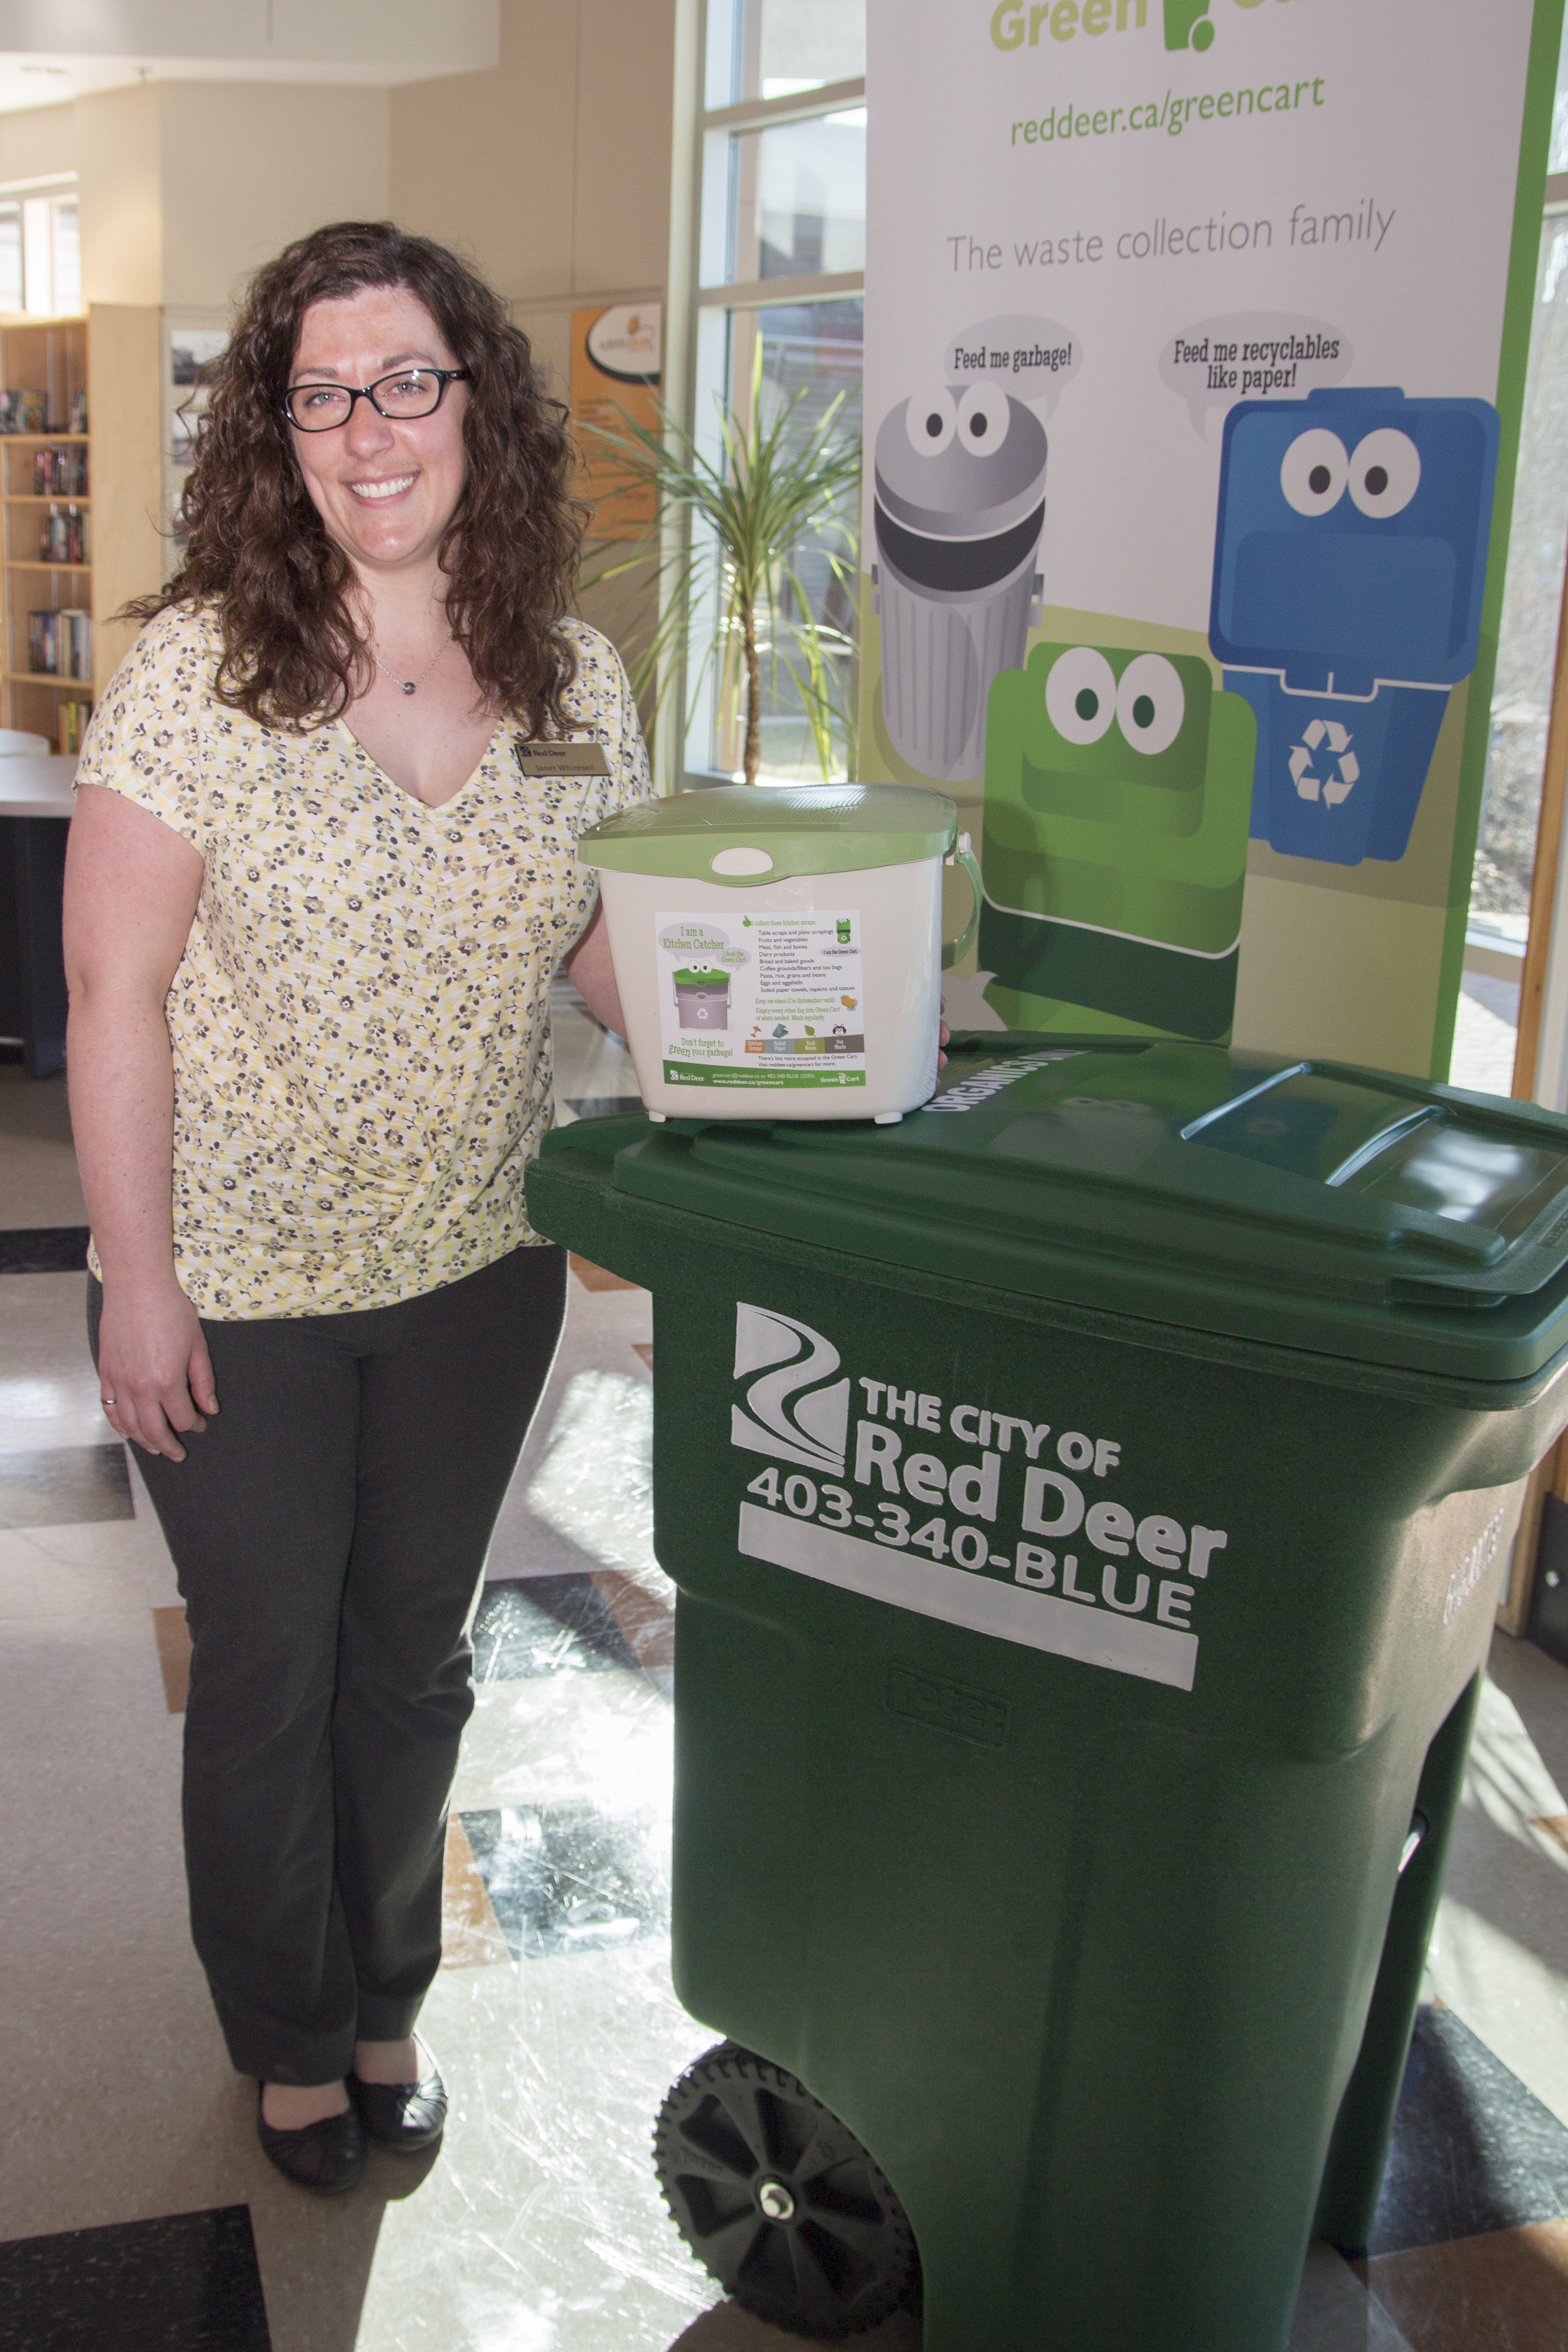 NEW PROGRAM – Waste Management Superintendent for the City of Red Deer Janet Whitesell stands beside the new green cart and kitchen bin that are tools in a plan to help reduce the amount of organic waste in the City landfill.